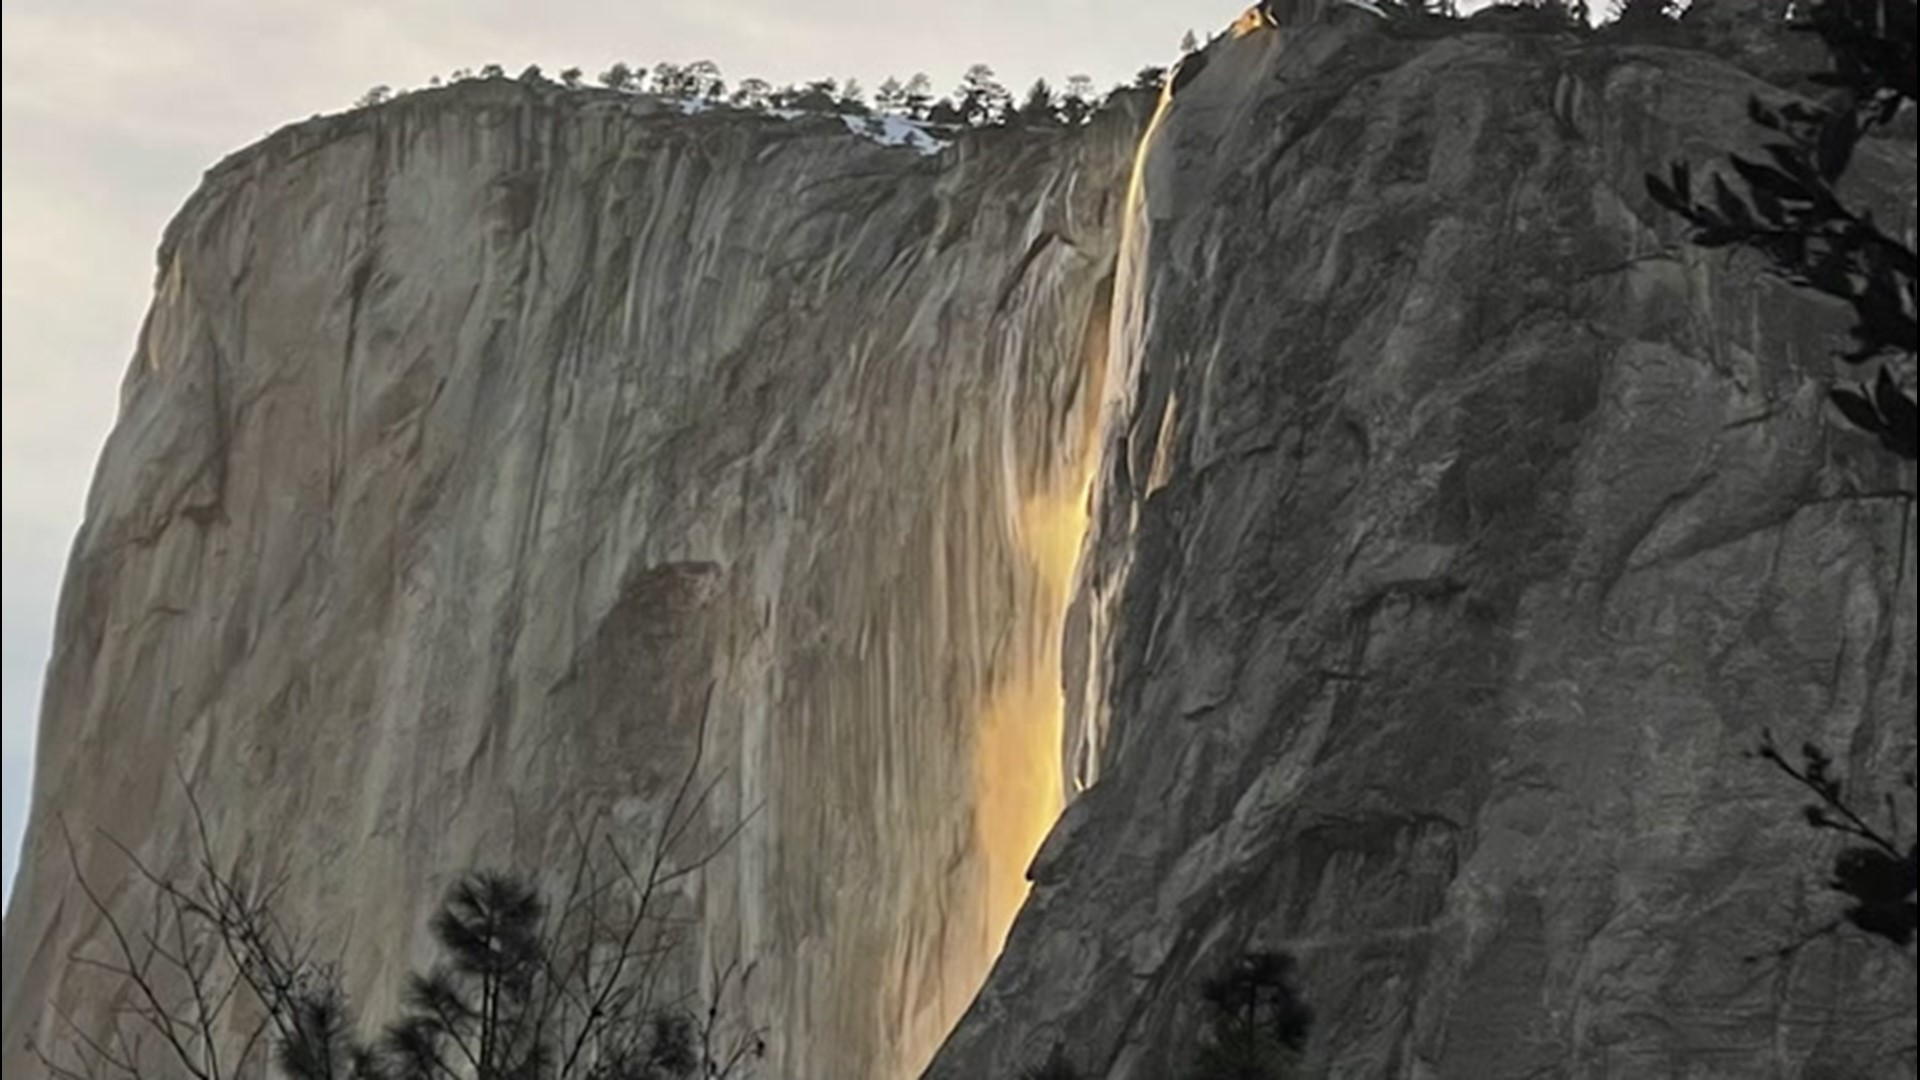 The 'Firefalls' in Yosemite National Park, California, is a popular destination that attracts tourists each year. Here's what causes this majestic phenomenon.